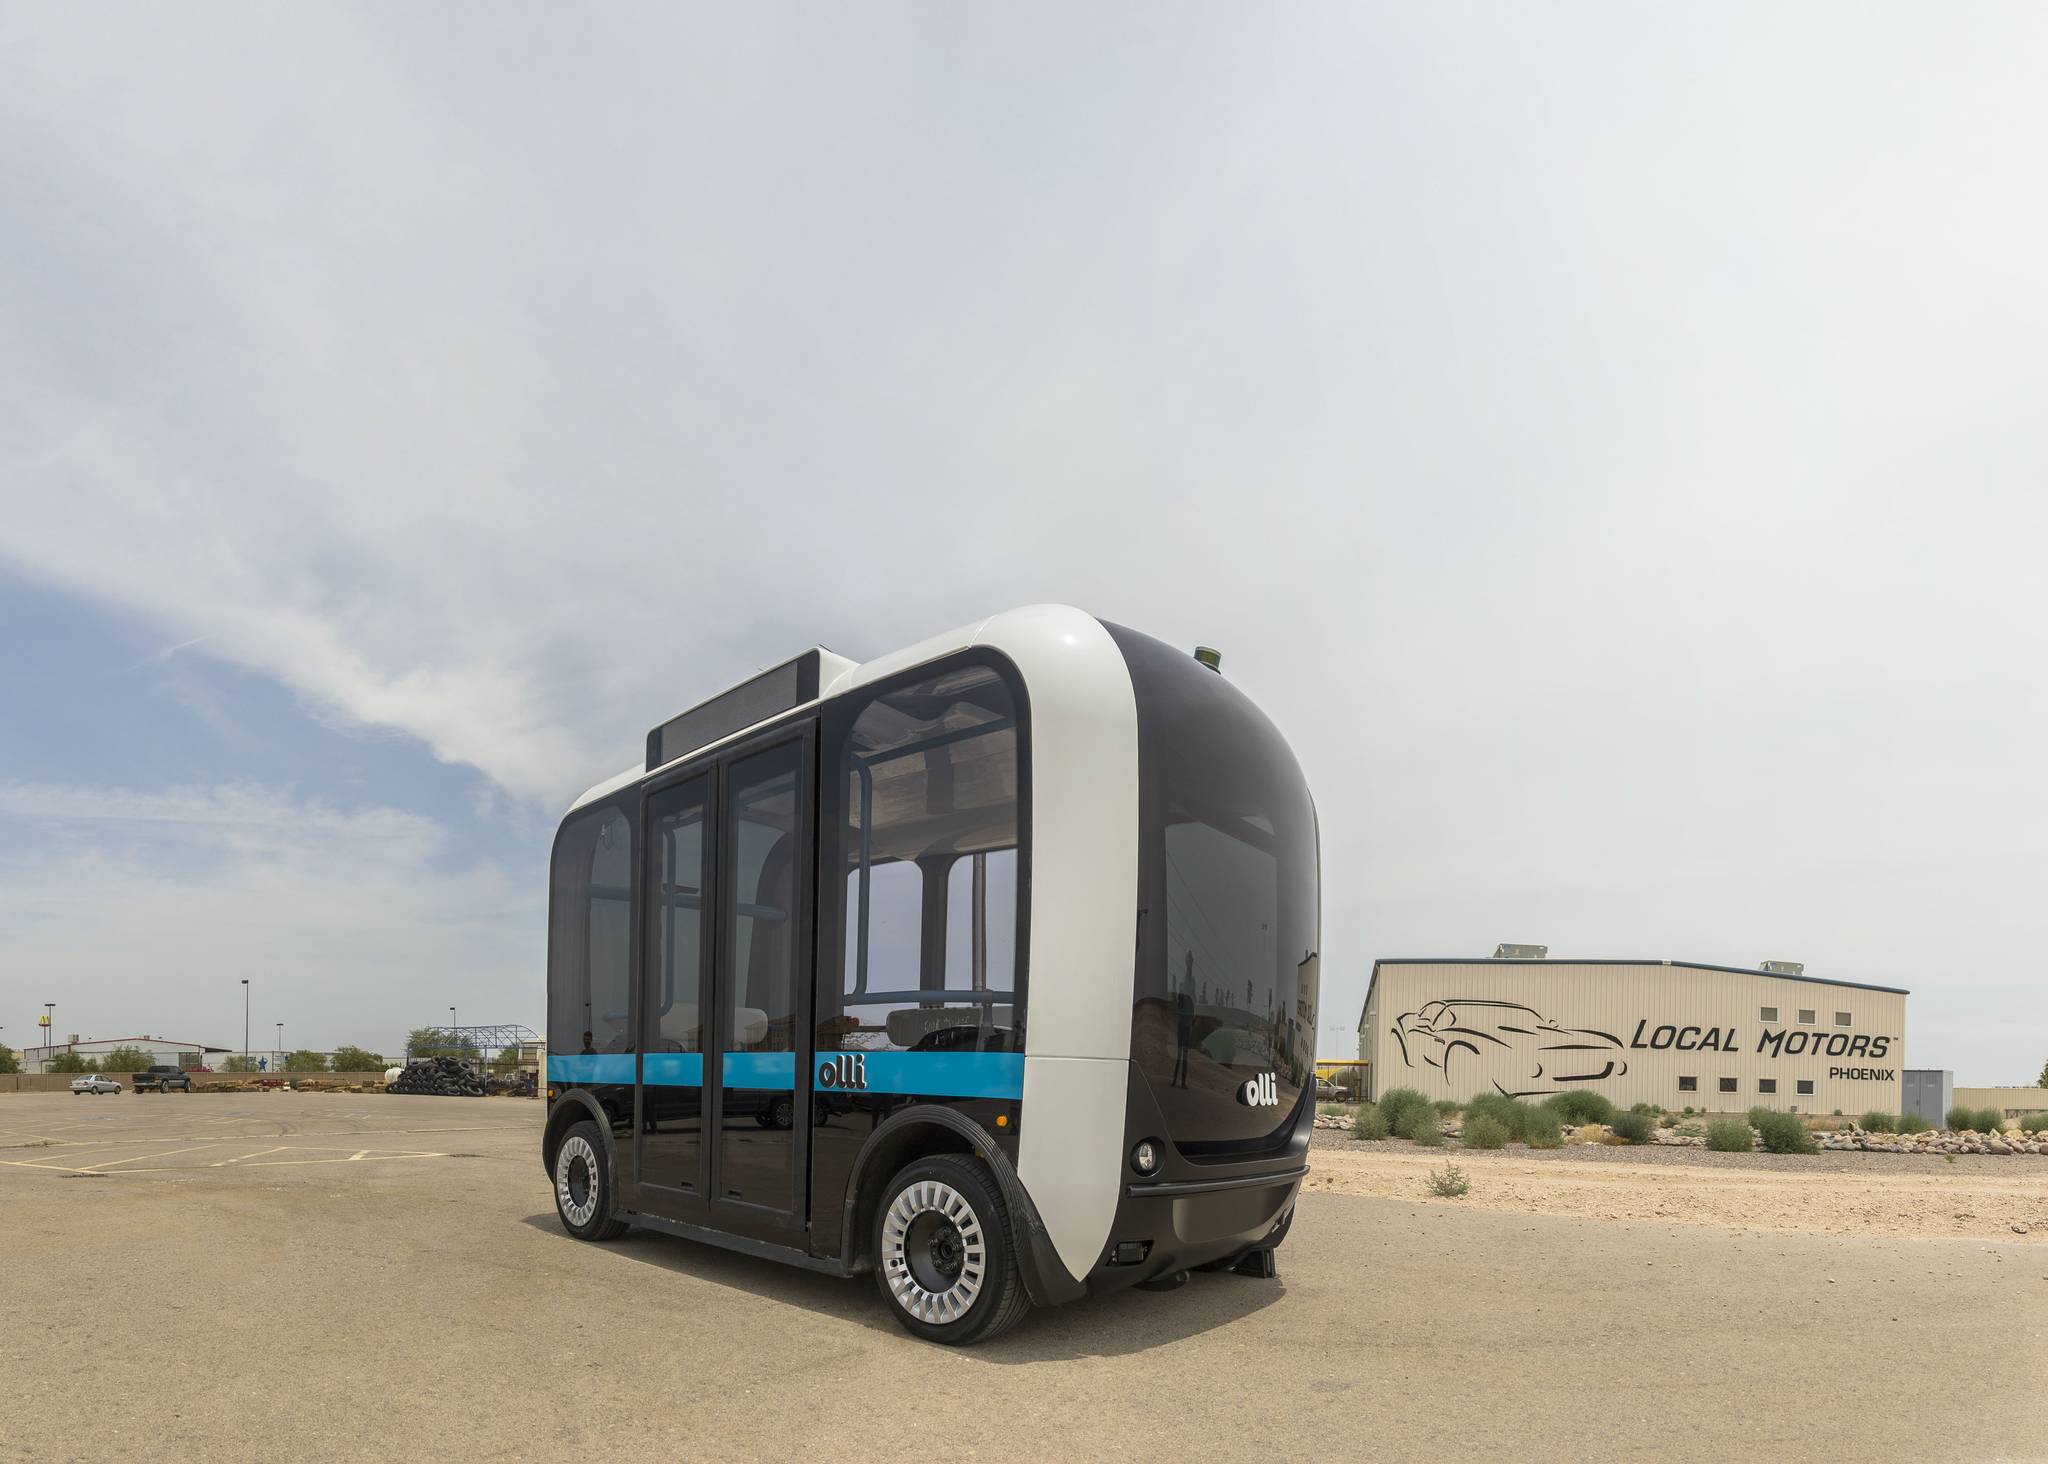 Olli is a driverless 3D-printed bus